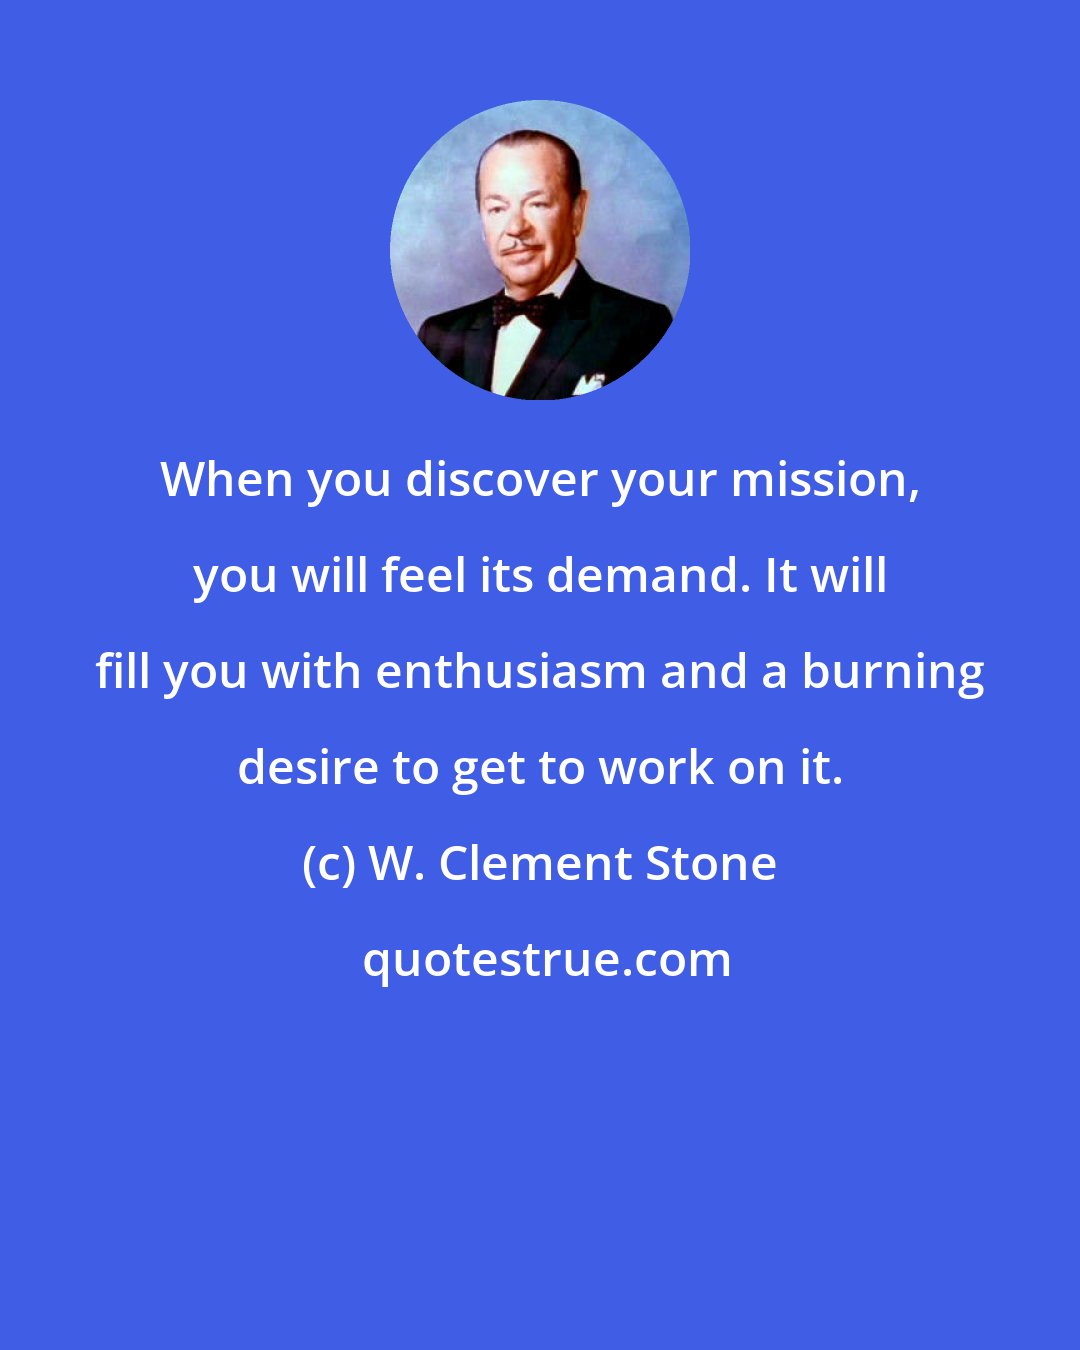 W. Clement Stone: When you discover your mission, you will feel its demand. It will fill you with enthusiasm and a burning desire to get to work on it.